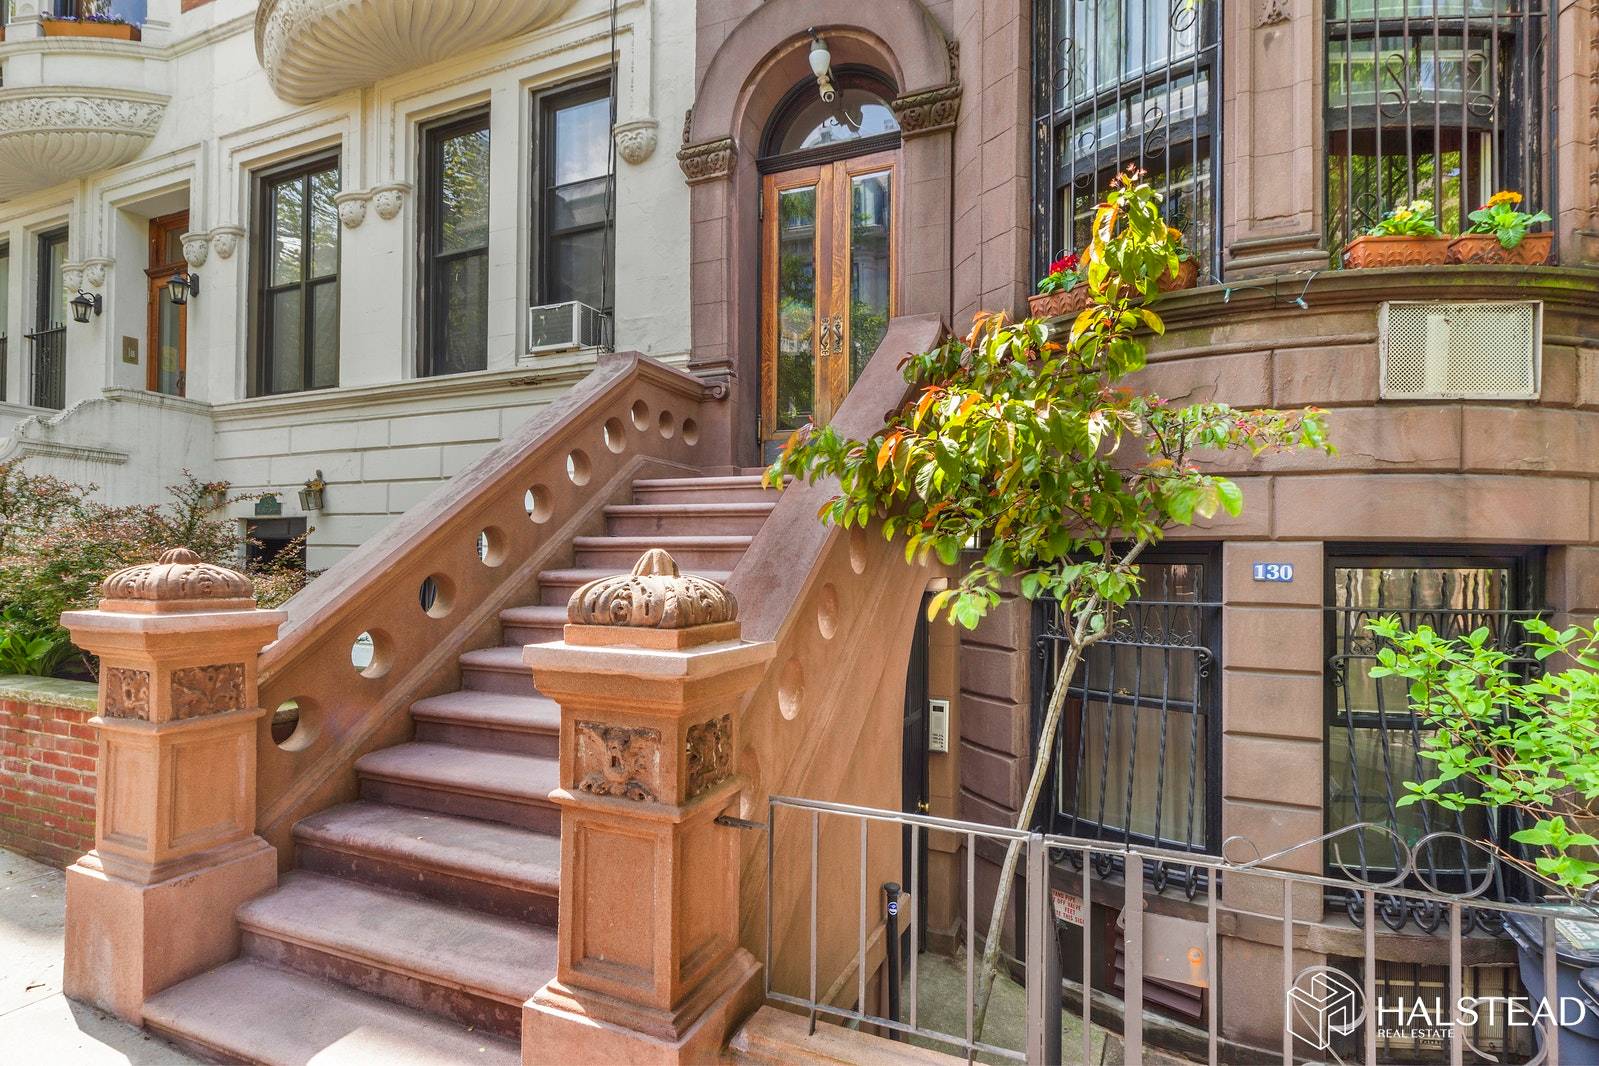 The best UWS townhouse on the market for under 6M.